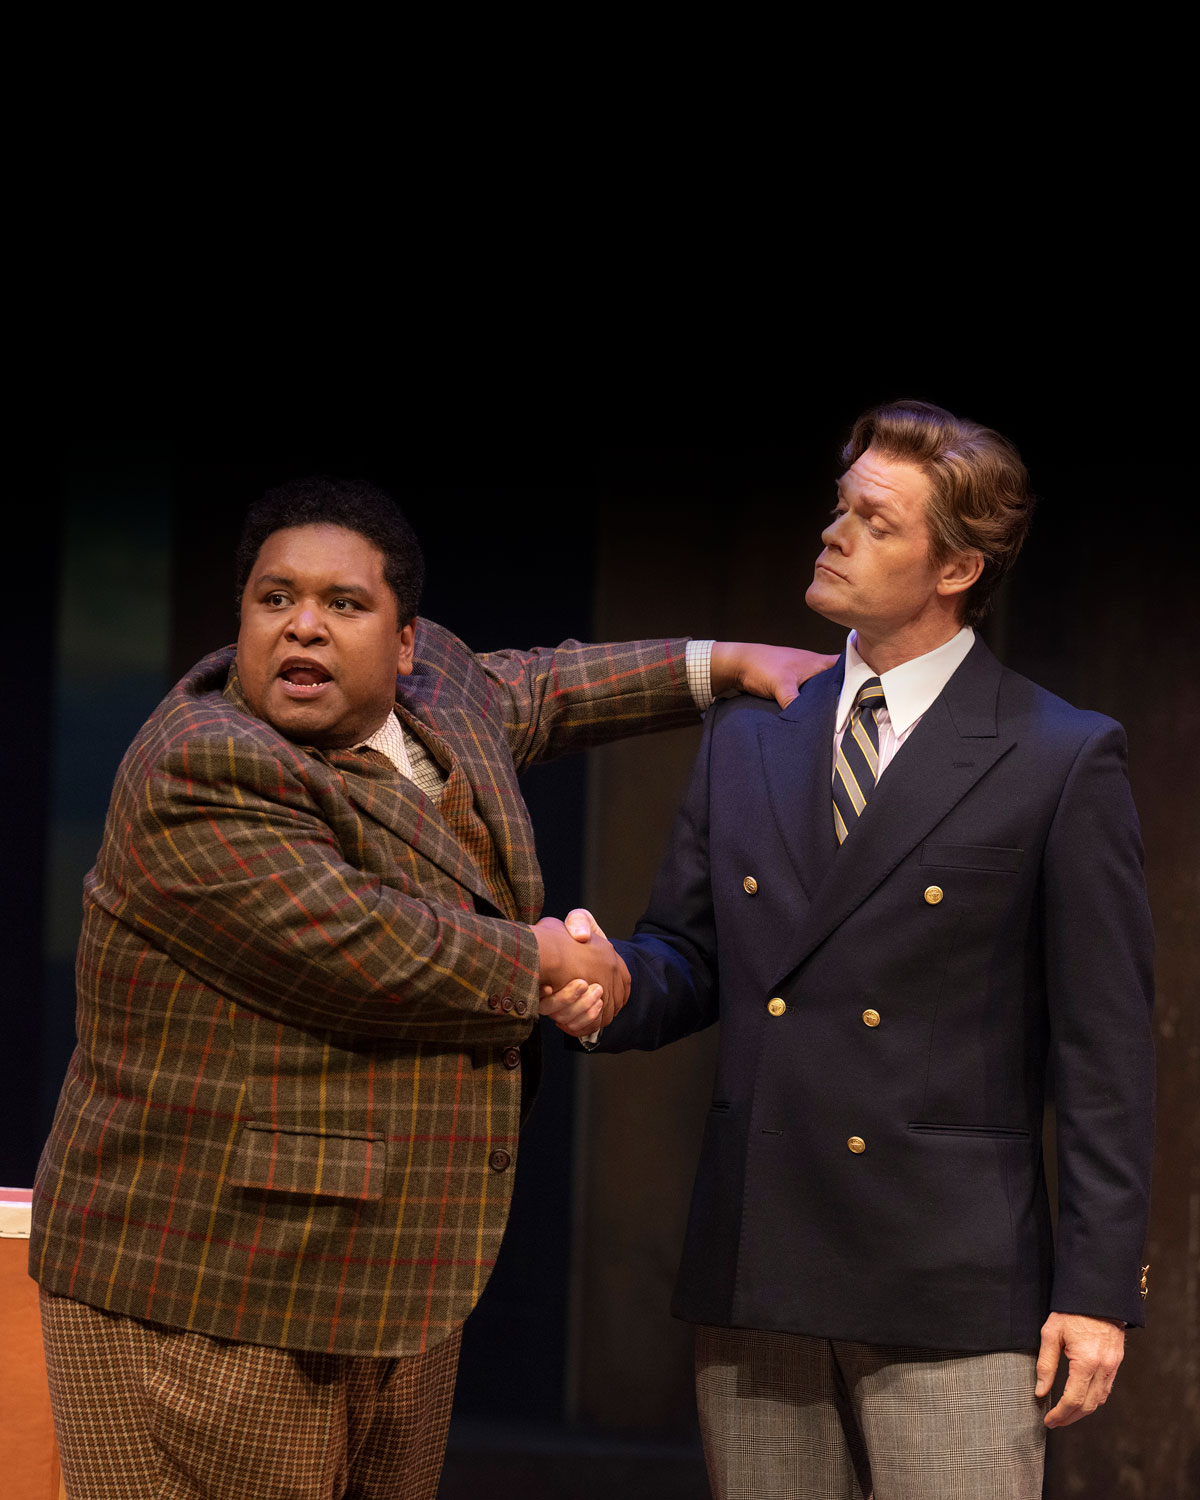 Peter Fernandes and Martin Happer in One Man, Two Guvnors. Photo by David Cooper.